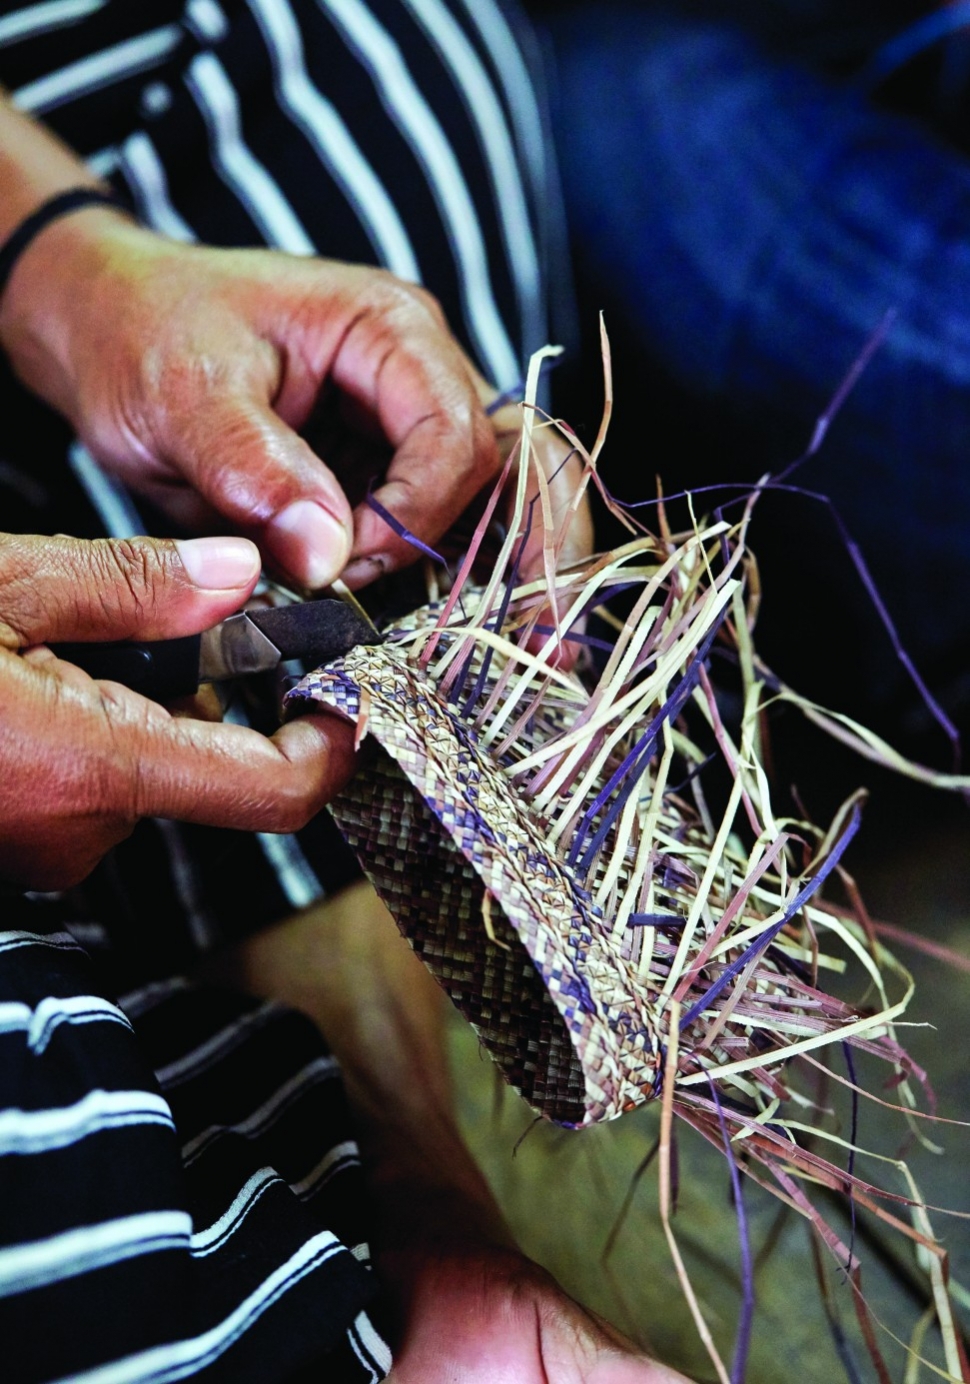 Weaving is a tradition in the community that has been passed down through the generations